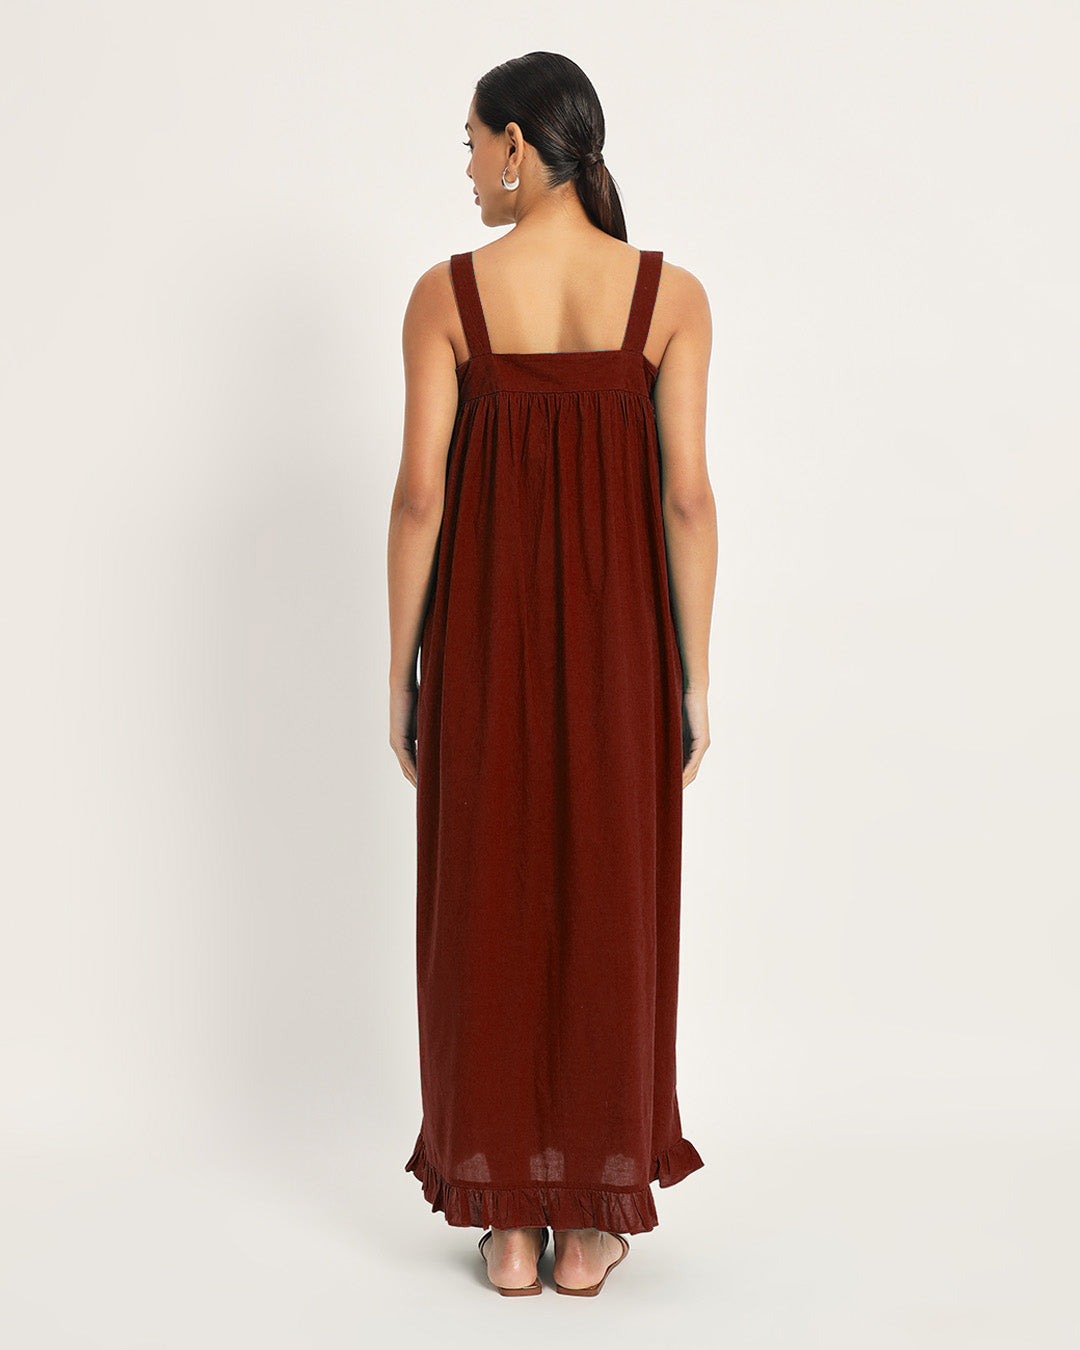 Combo: Black & Russet Red Twilight to Noon Nightdress